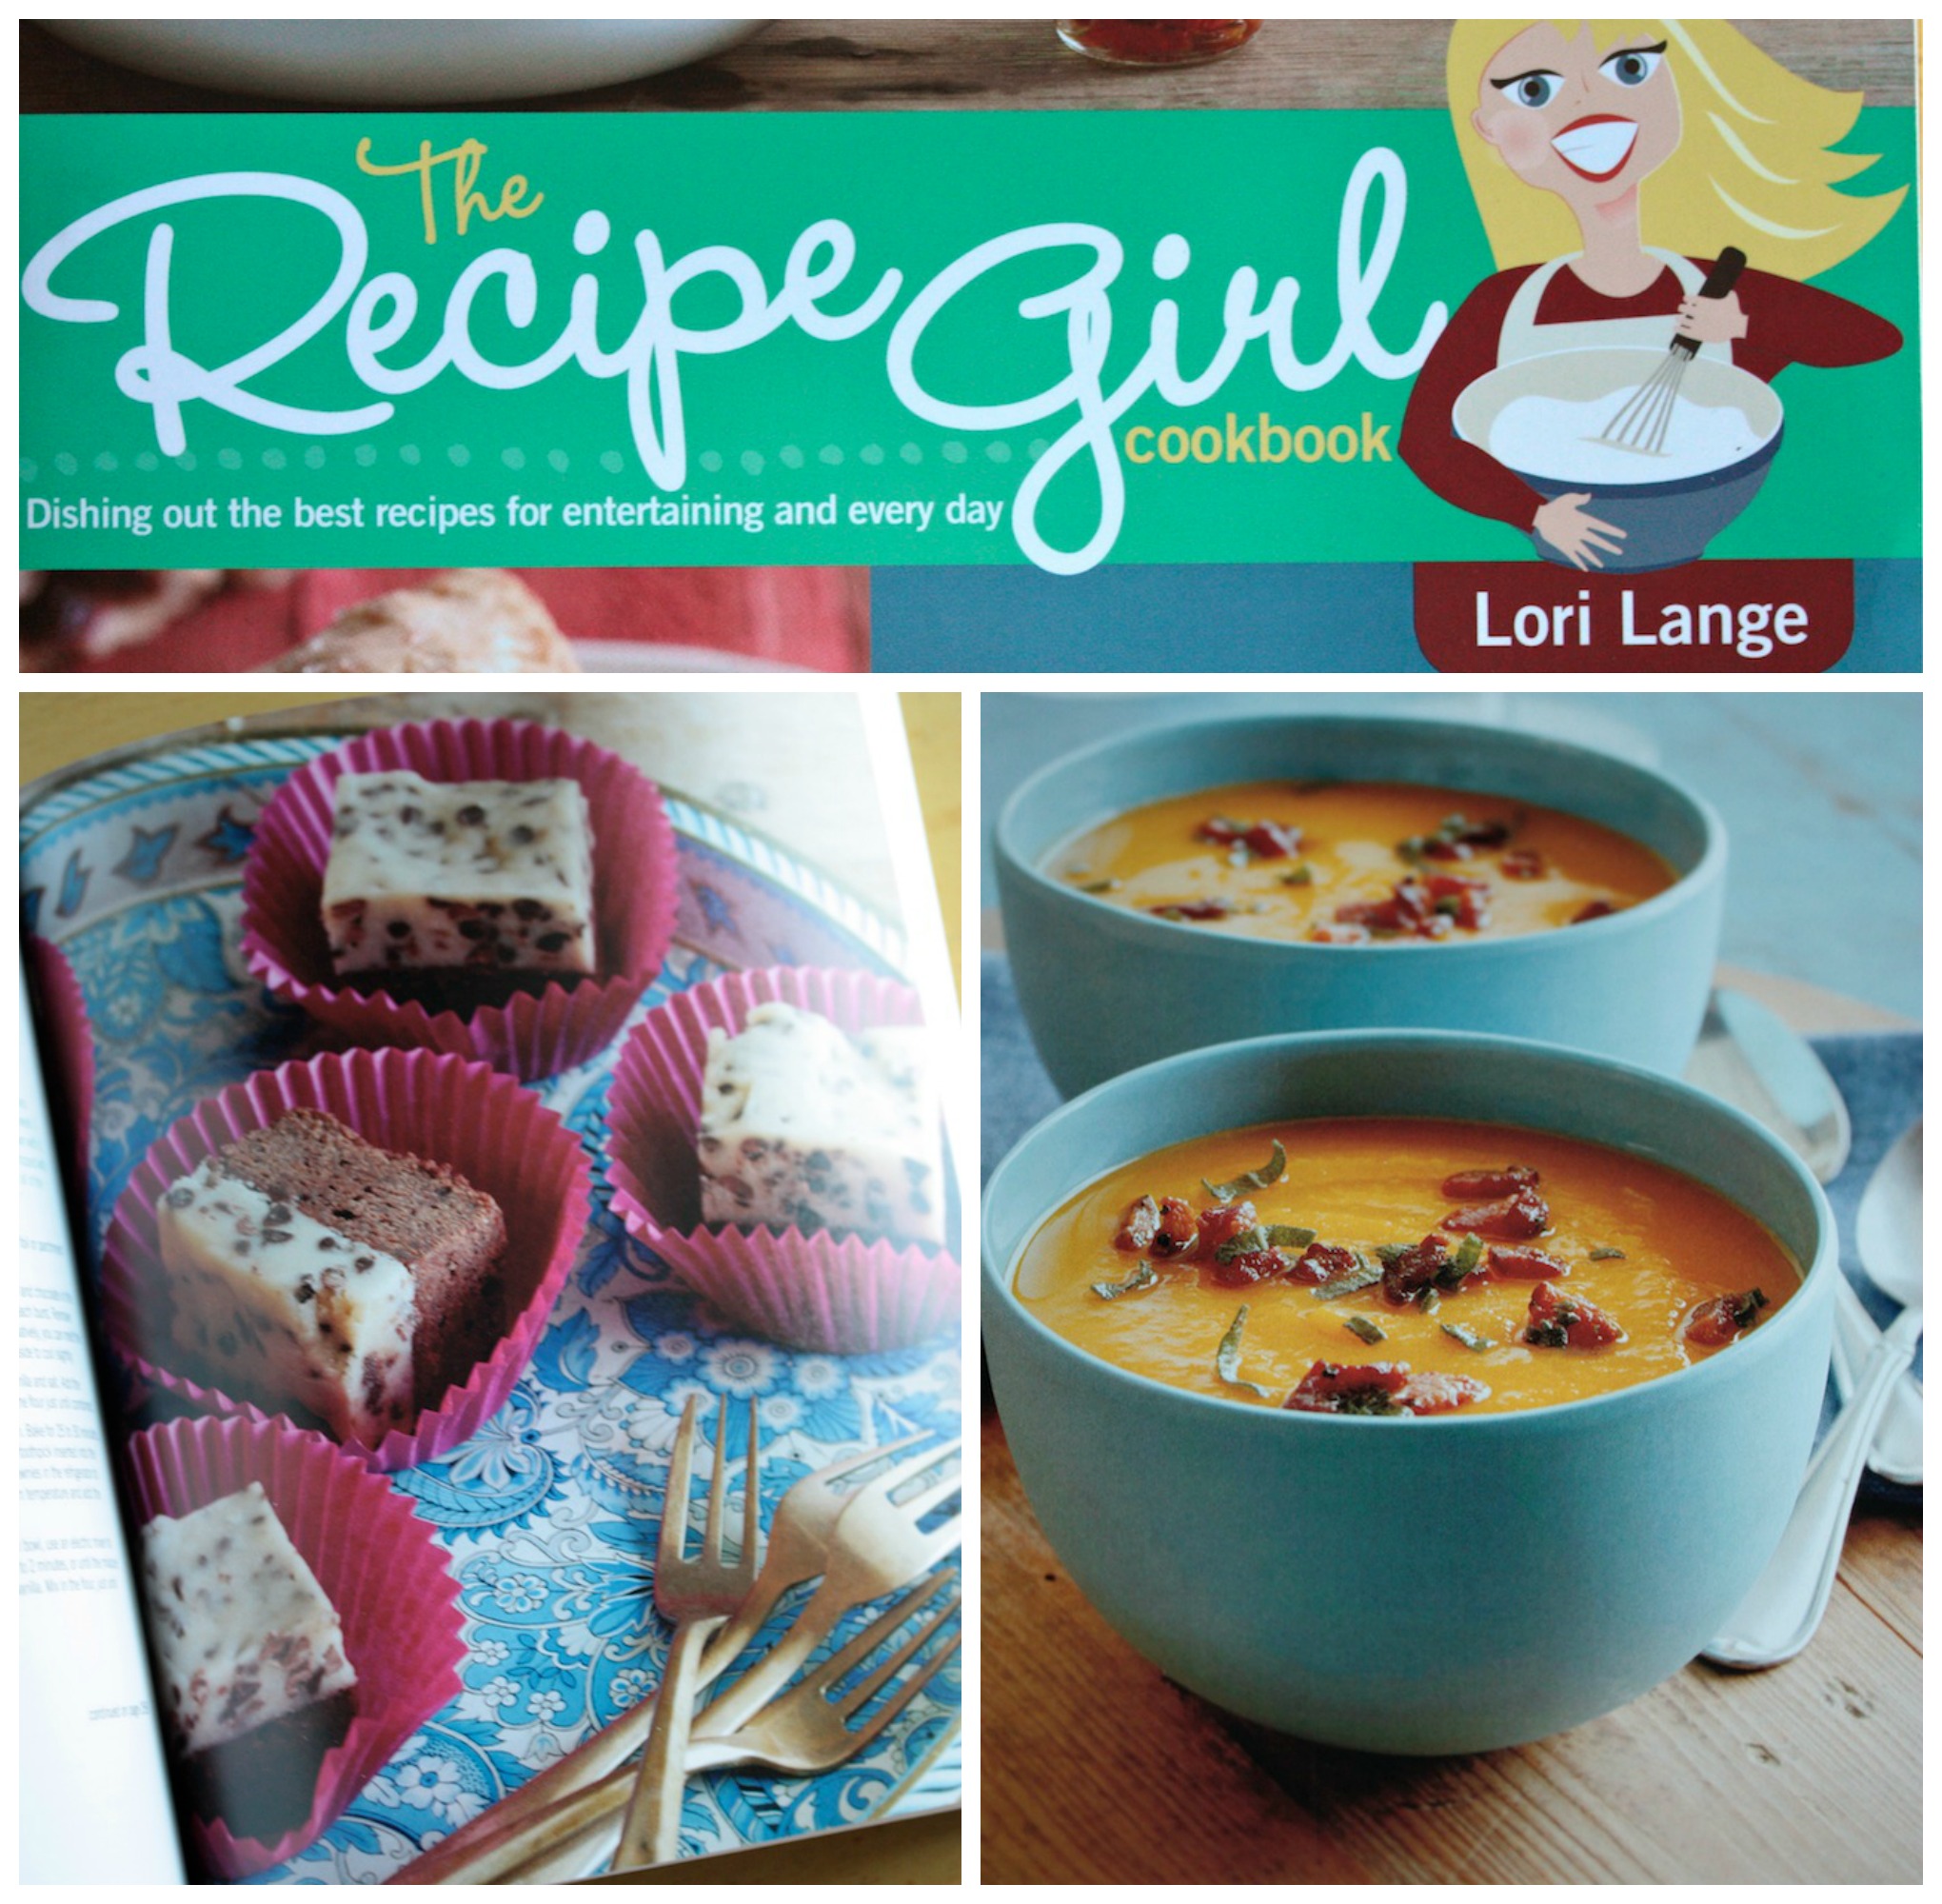 Recipe Girl Cookbook Giveaway www.countrycleaver.com